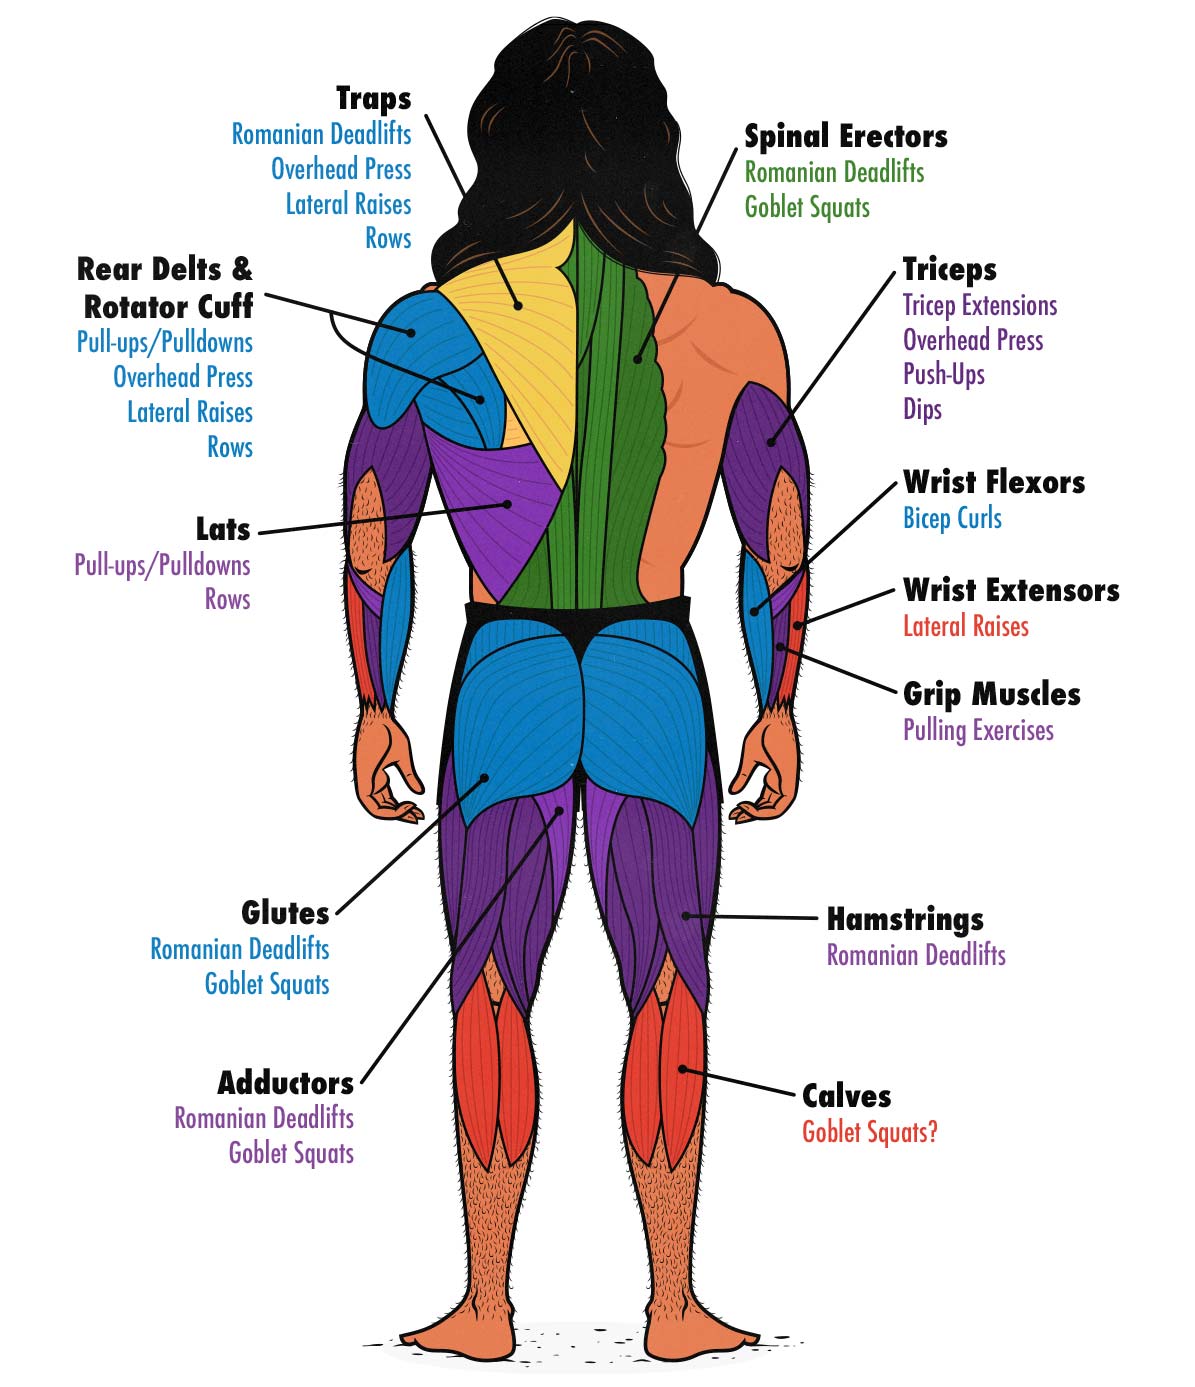 Diagram showing which exercises train which muscles groups. Back view.